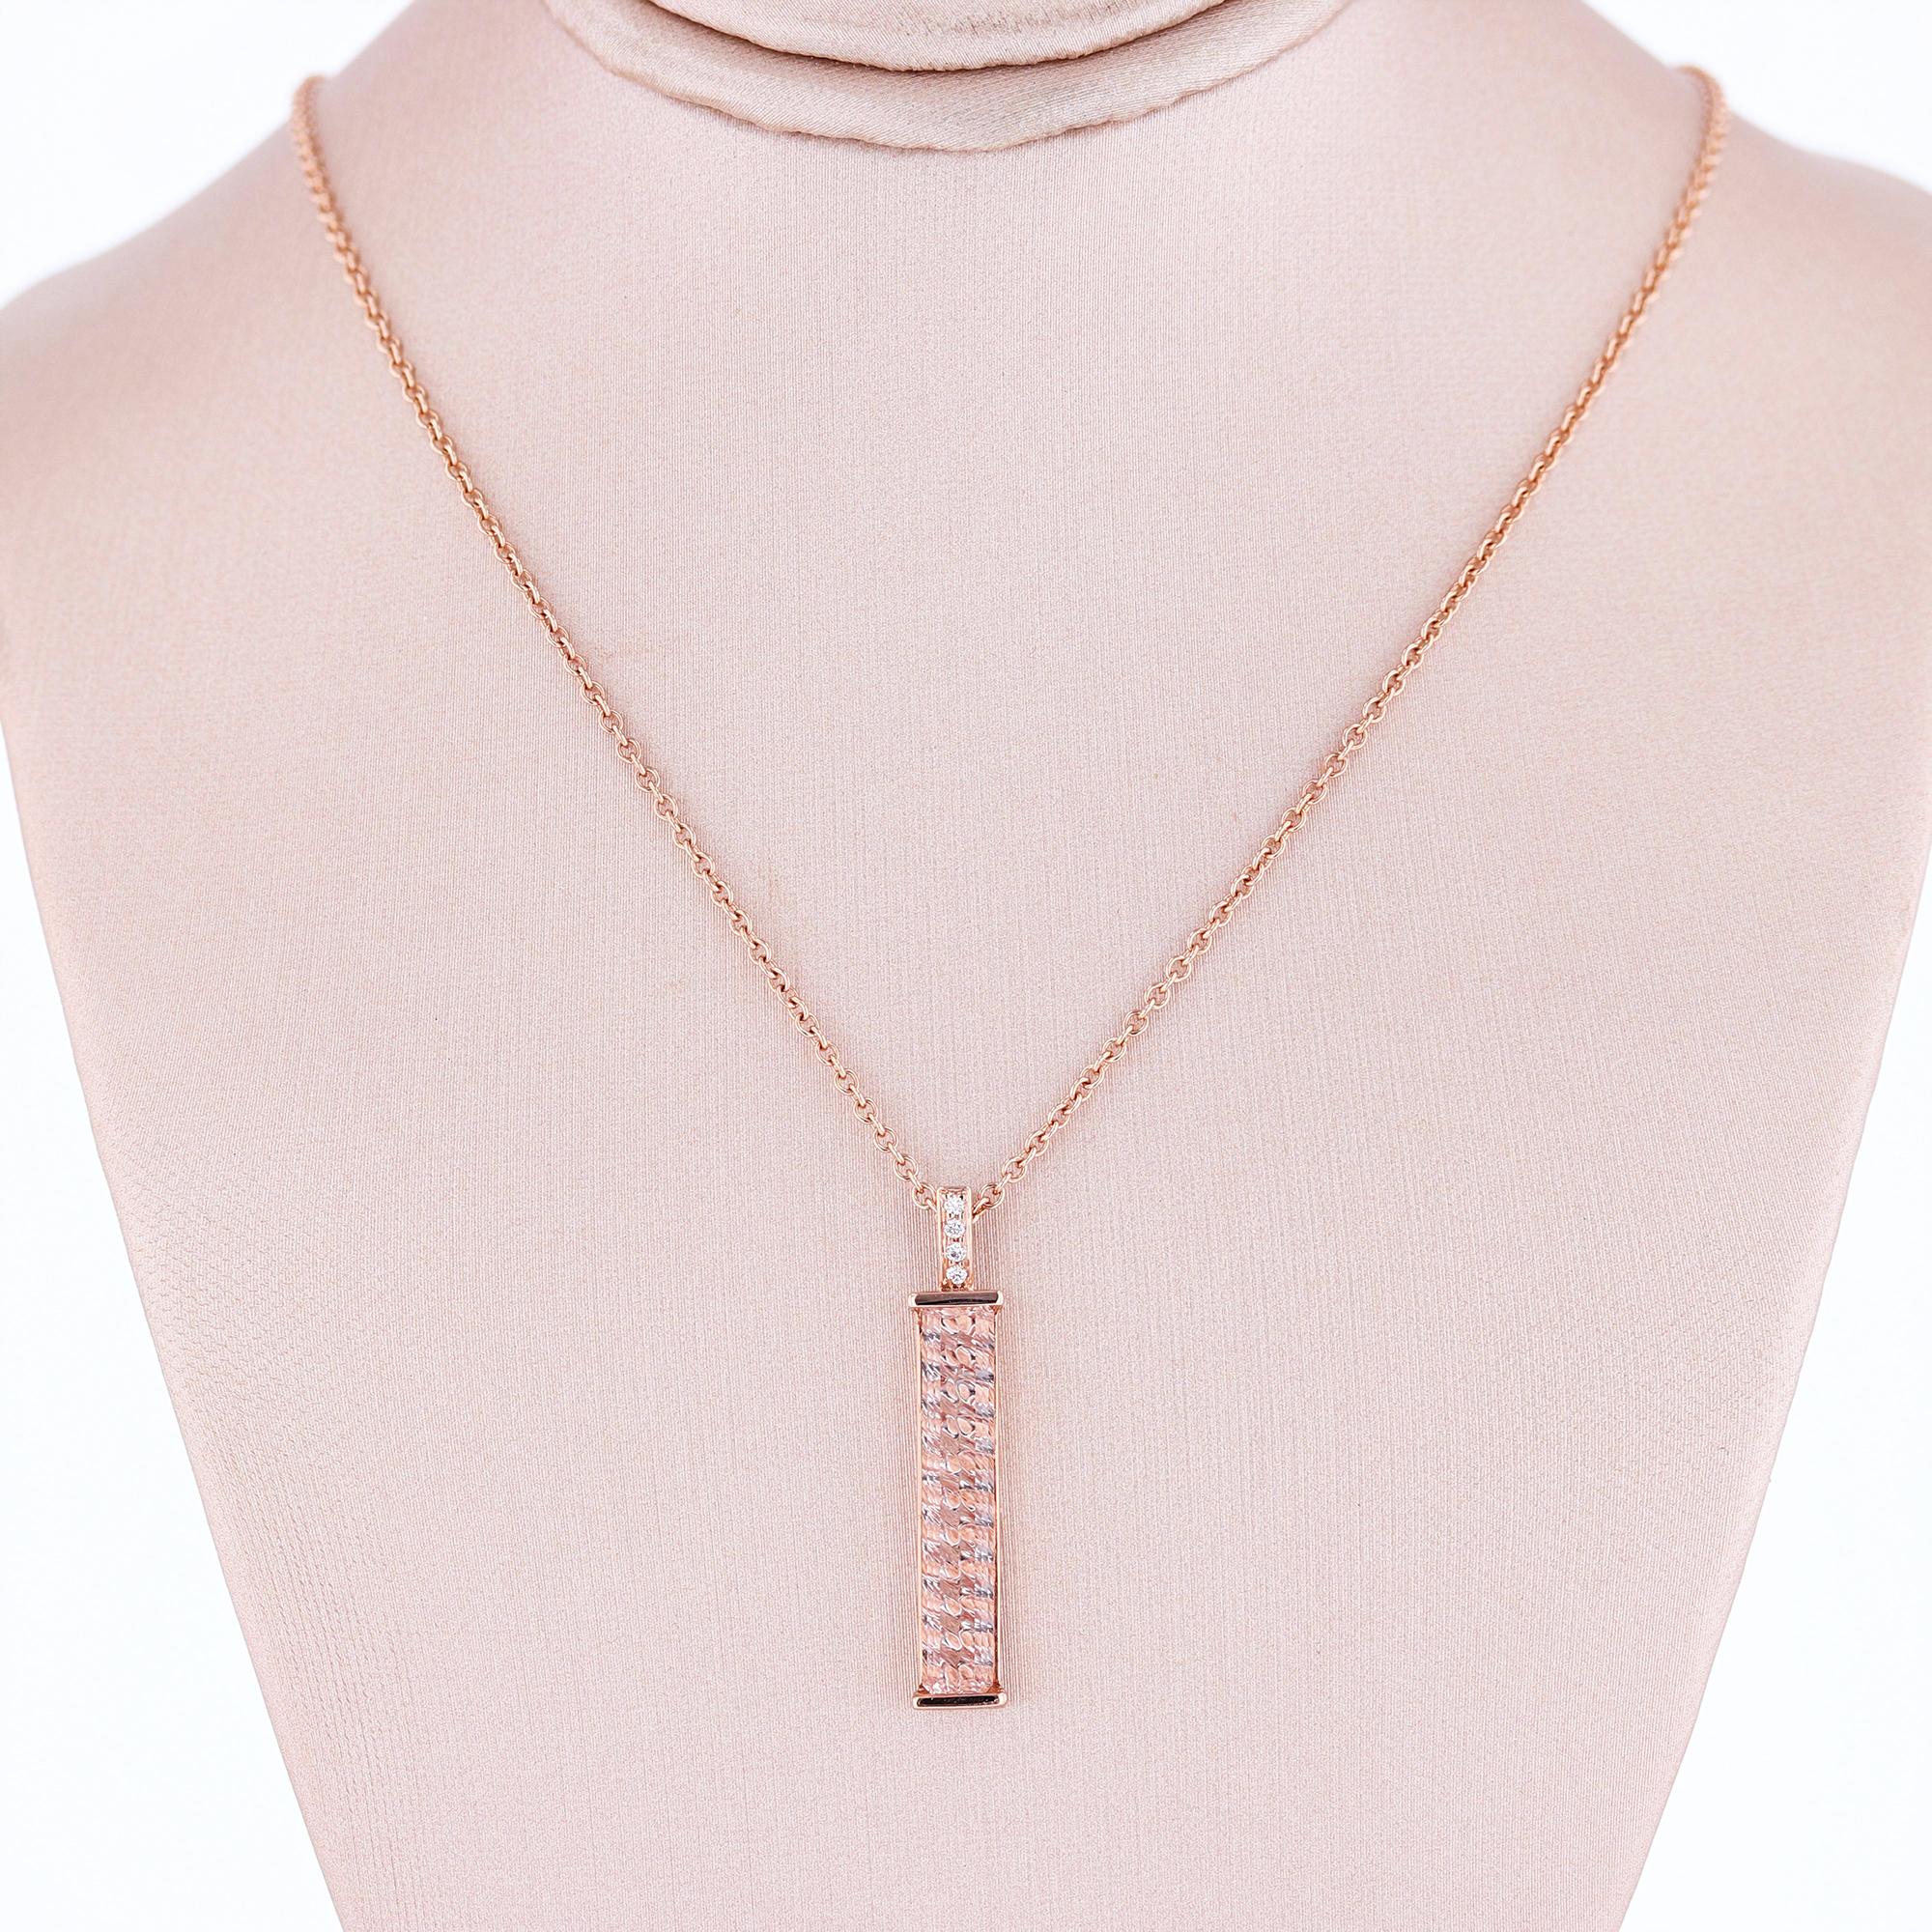 The pendant is made in 14k rose gold gold and features a 3.31ct special cut, rectangular shape green morganite, prong set, and 4 round cut diamonds weighing 0.02ct with a color grade (H) and a clarity grade (SI2), prong set.

The chain is 14k rose